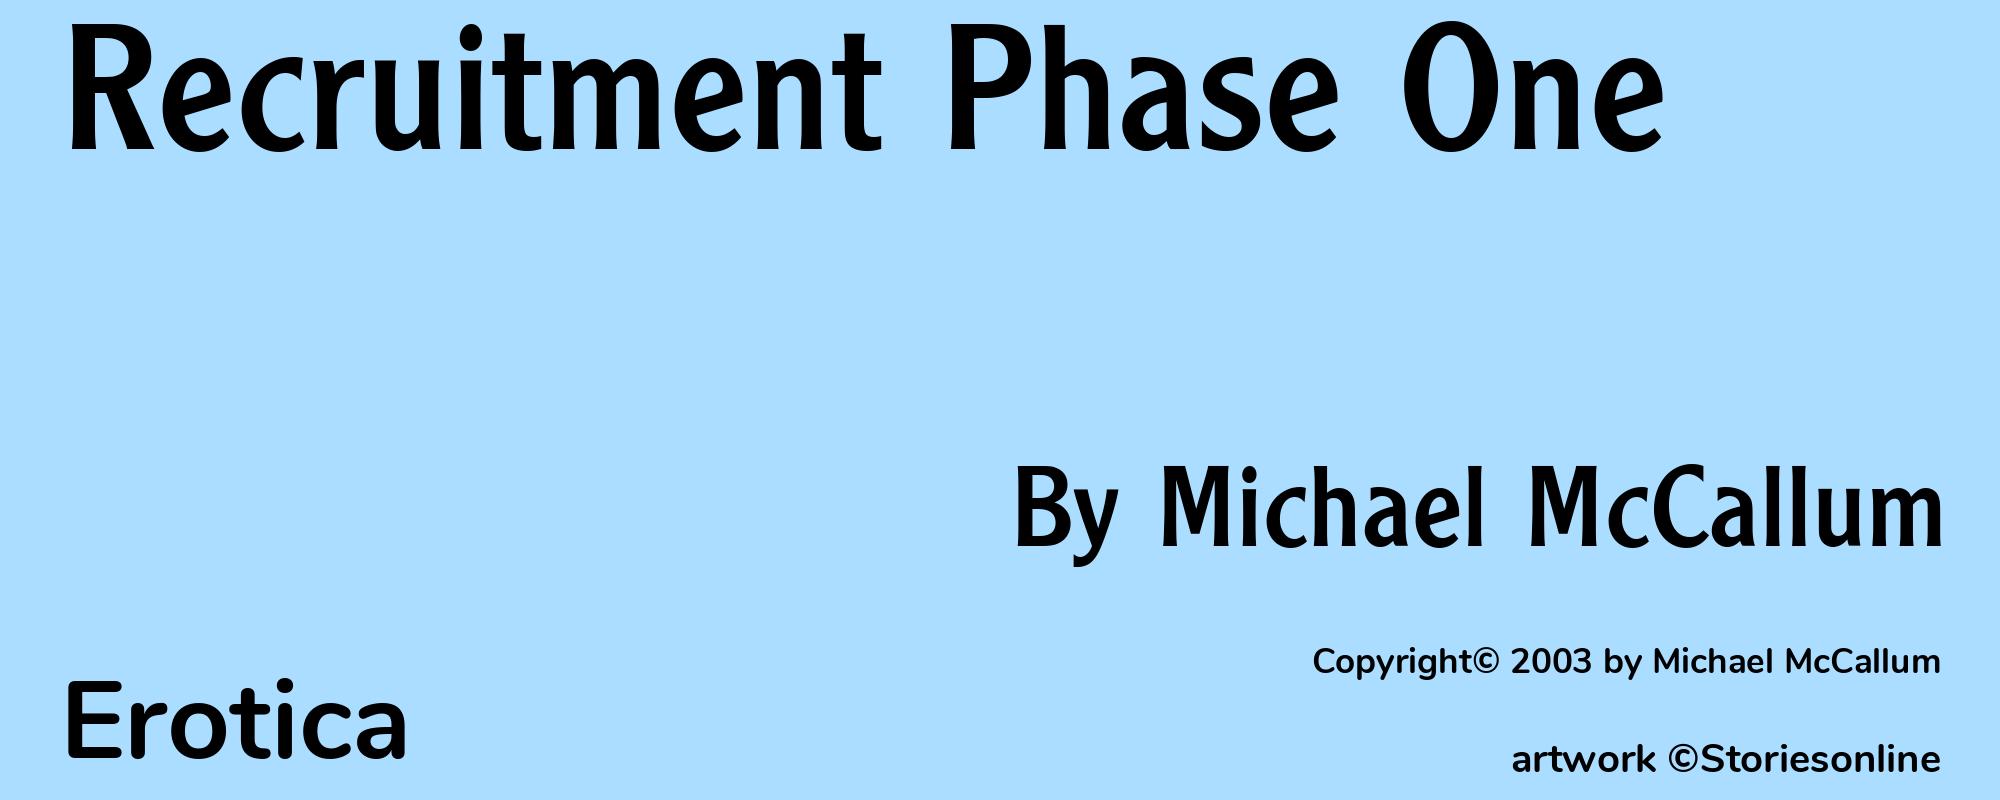 Recruitment Phase One - Cover